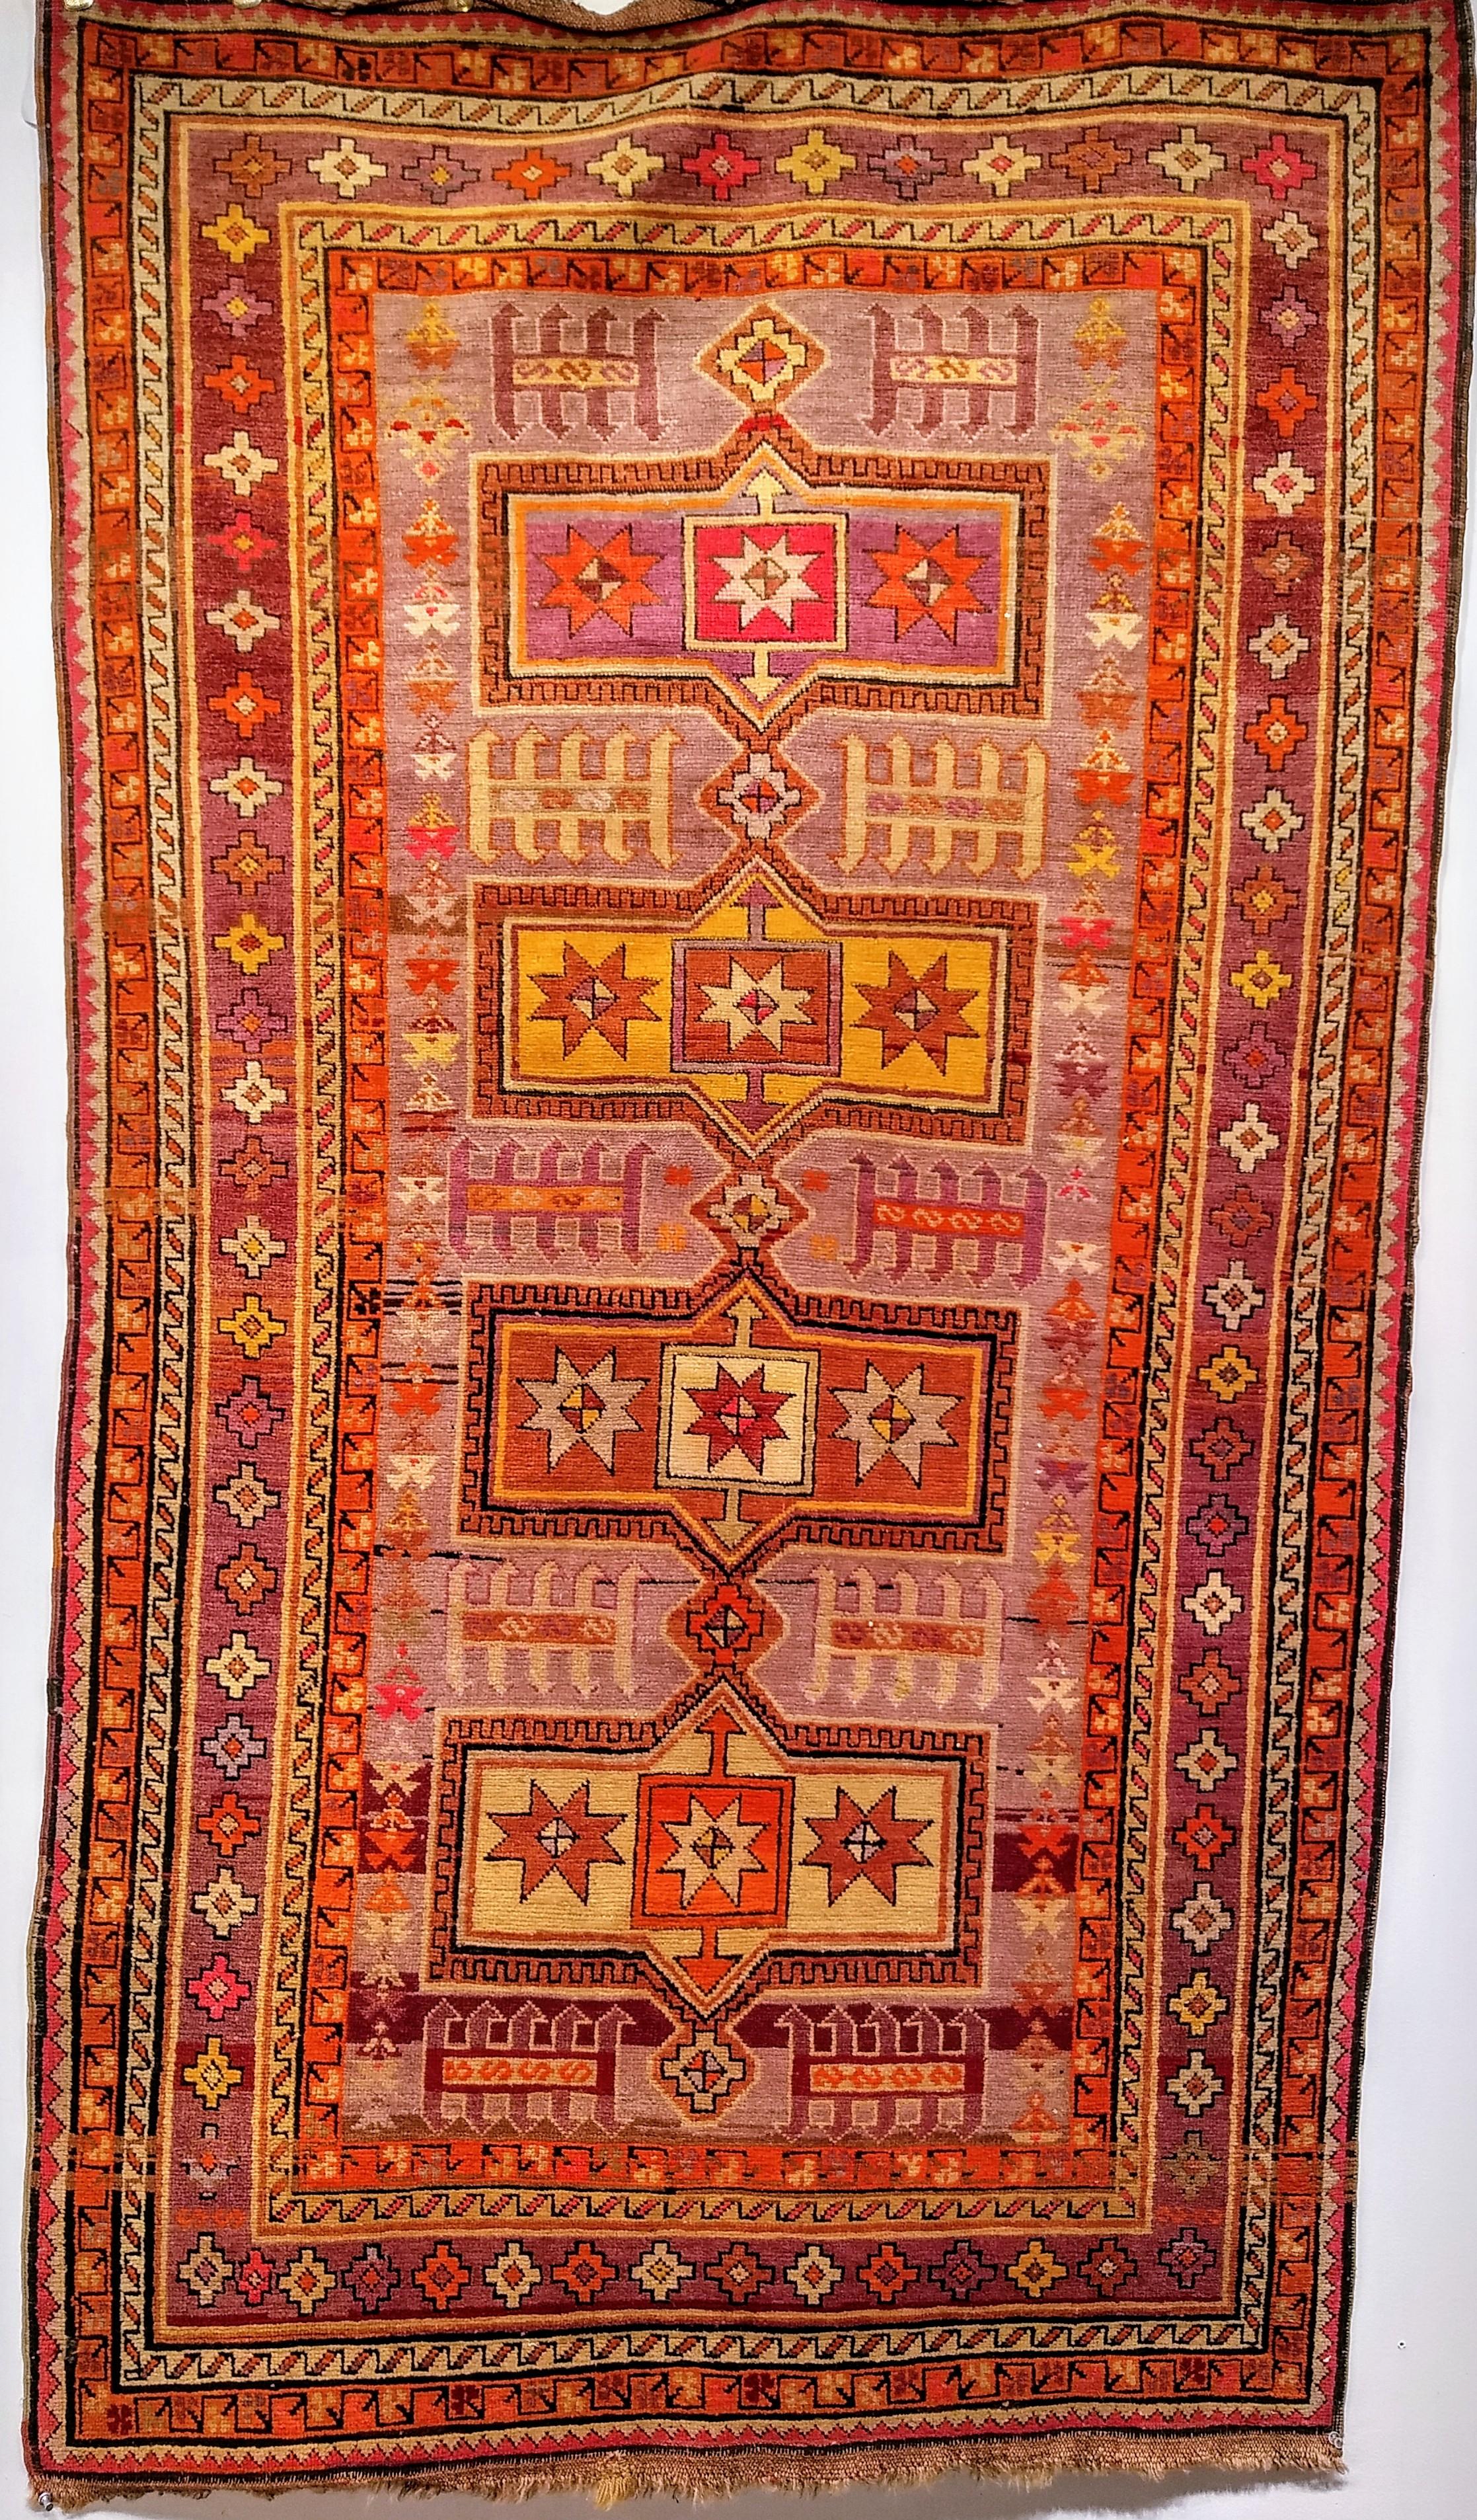 Vintage Moroccan rug in a geometric pattern in vibrant colors including purple, pink, yellow, magenta, and orange. The rug's design and the color palette is intended to make its presence felt and appreciated.  It reminds one of the wonderful and